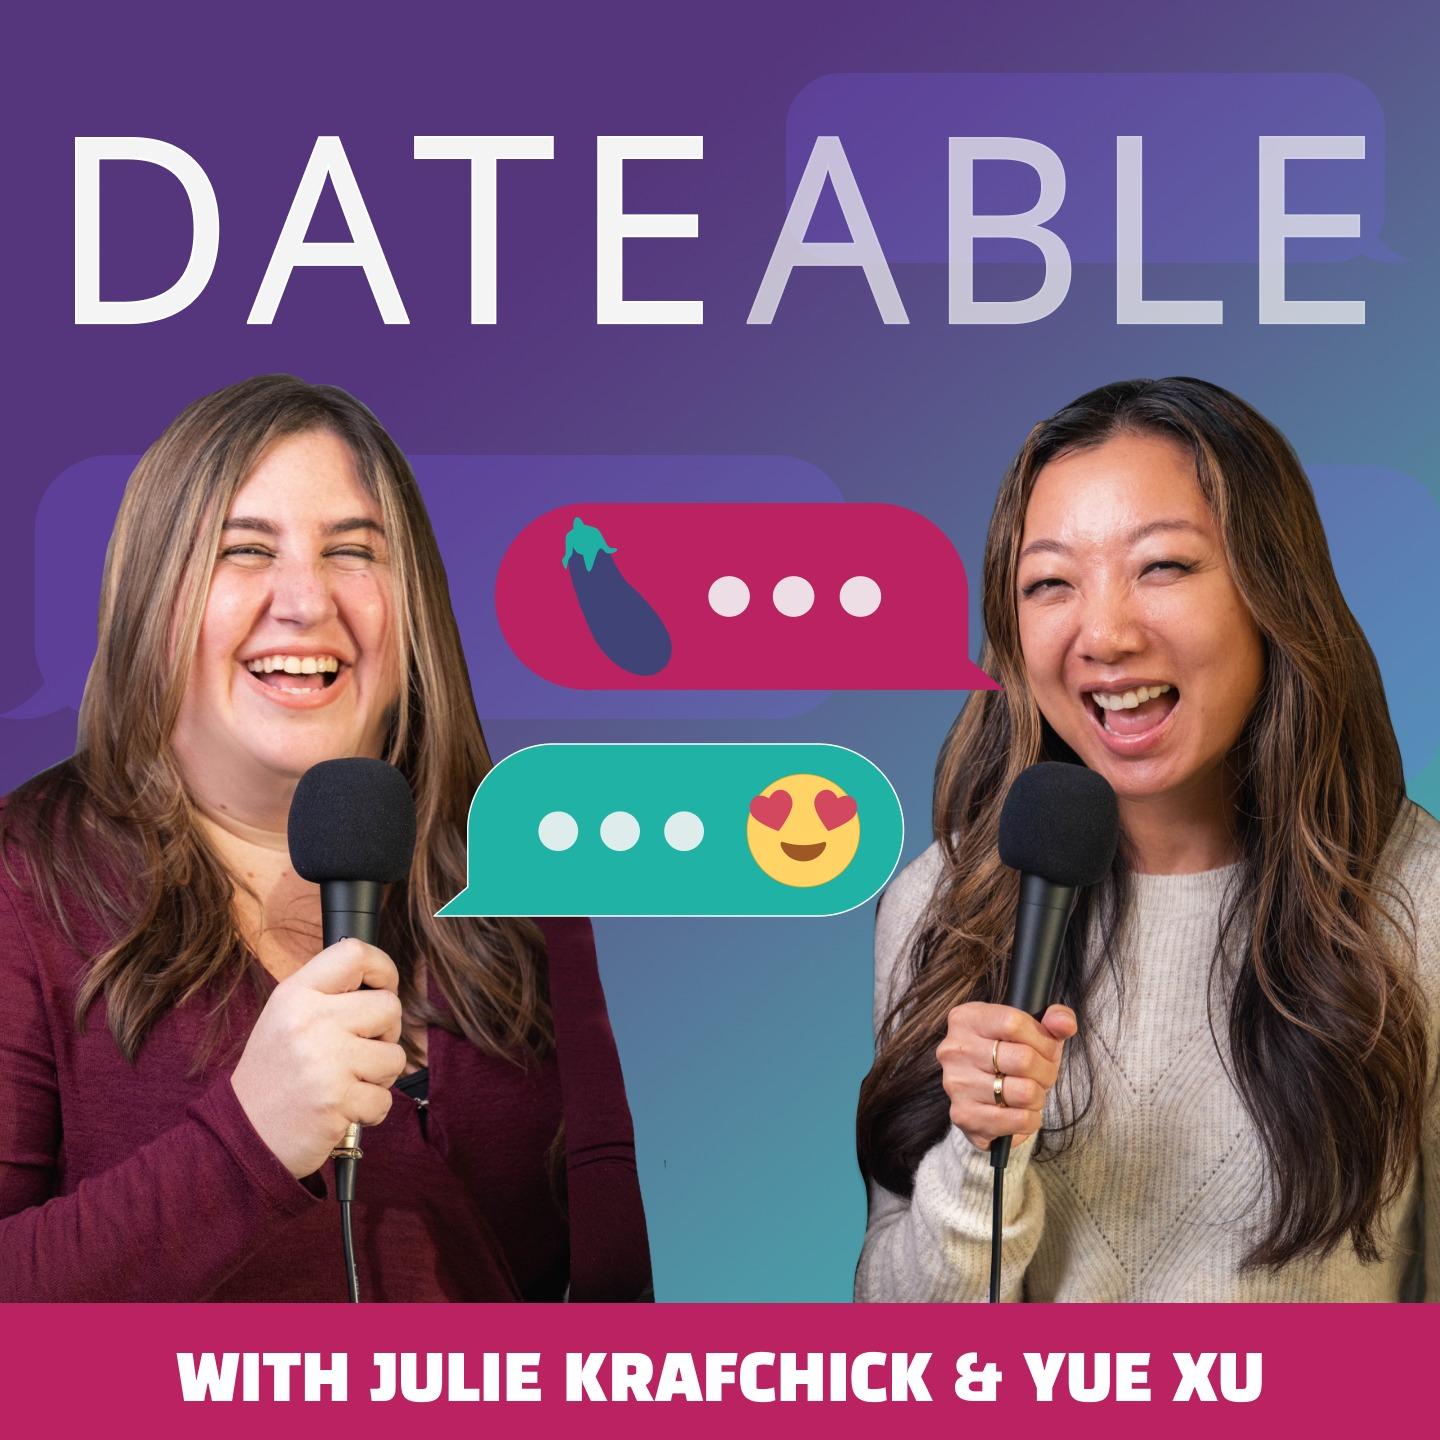 Dateable: Your insider's look into modern dating